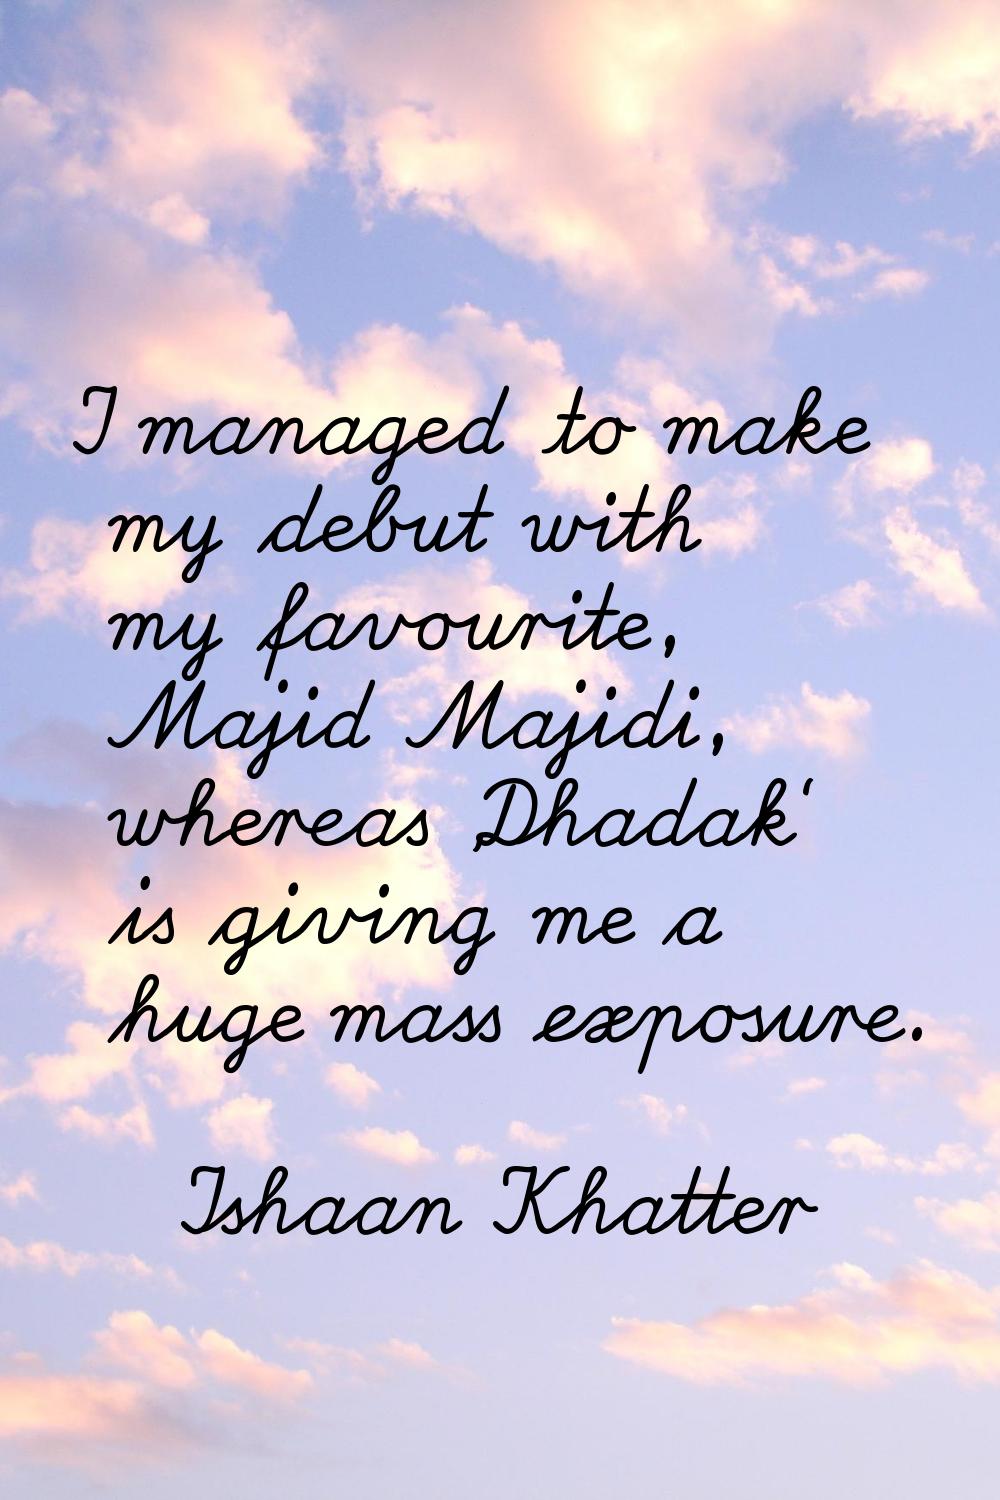 I managed to make my debut with my favourite, Majid Majidi, whereas 'Dhadak' is giving me a huge ma